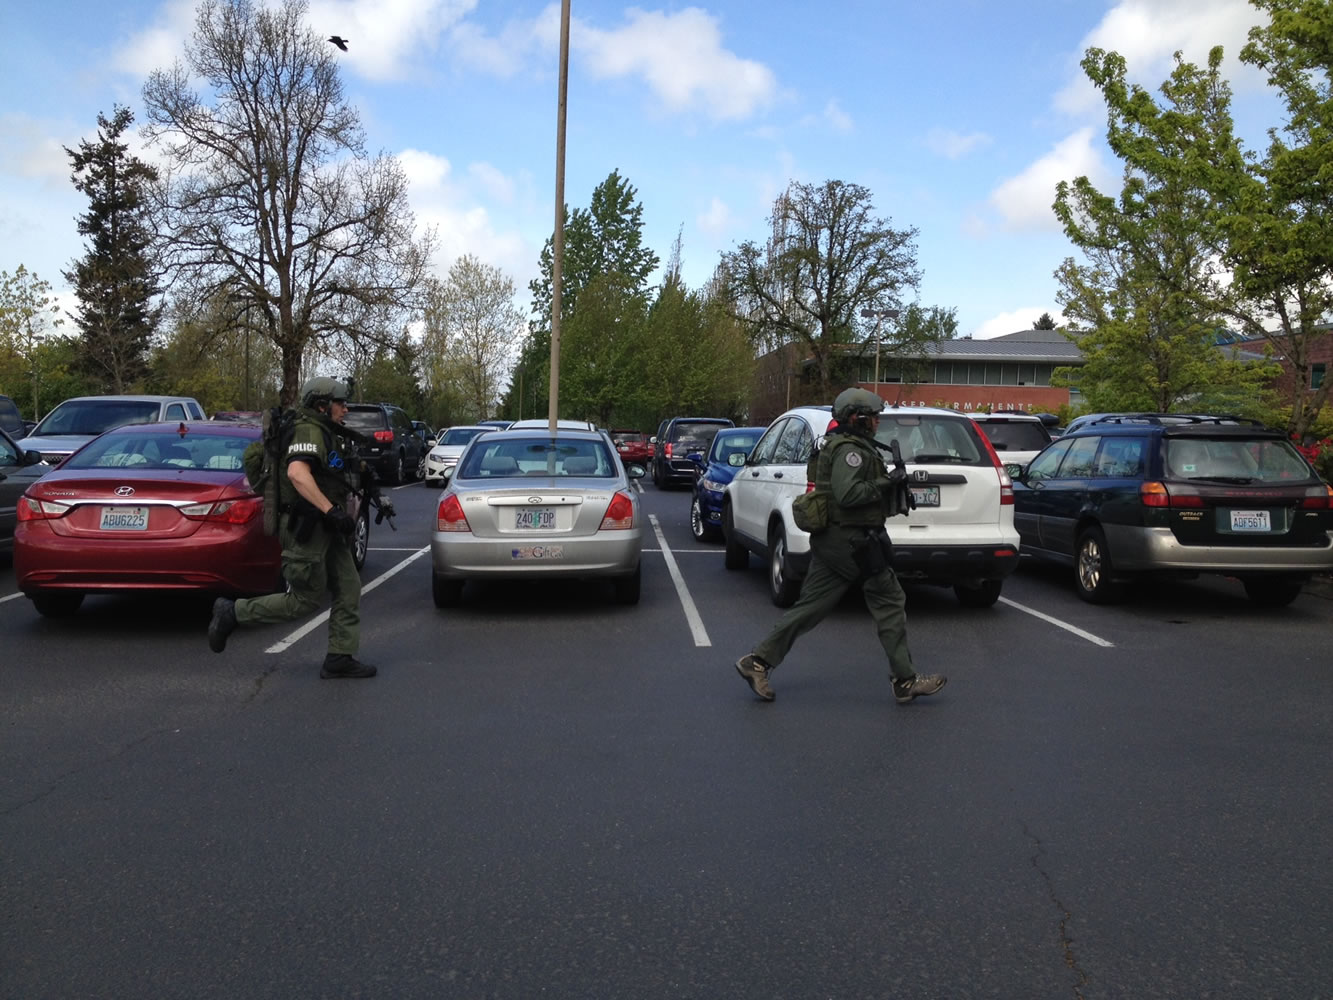 Heavily-armed police officers run toward the University Plaza building, just north of Kaiser Permanente's Salmon Creek Medical Office, after a man with reported mental health conditions brought a firearm into a mental health clinic.